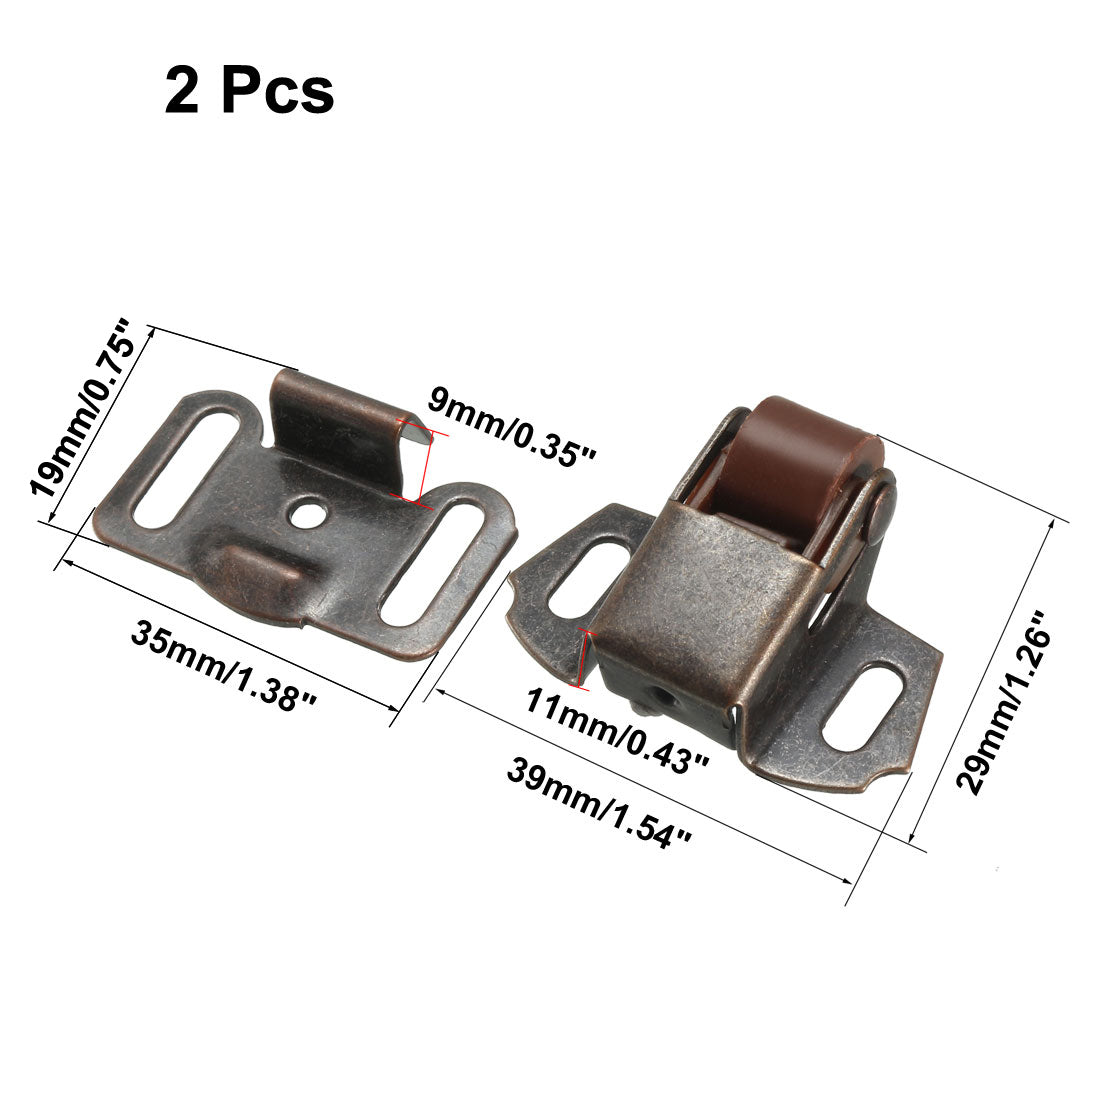 uxcell Uxcell Retro Cabinet Wardrobe Door Single Roller Catch Ball Latch Hardware Copper Tone 2pcs